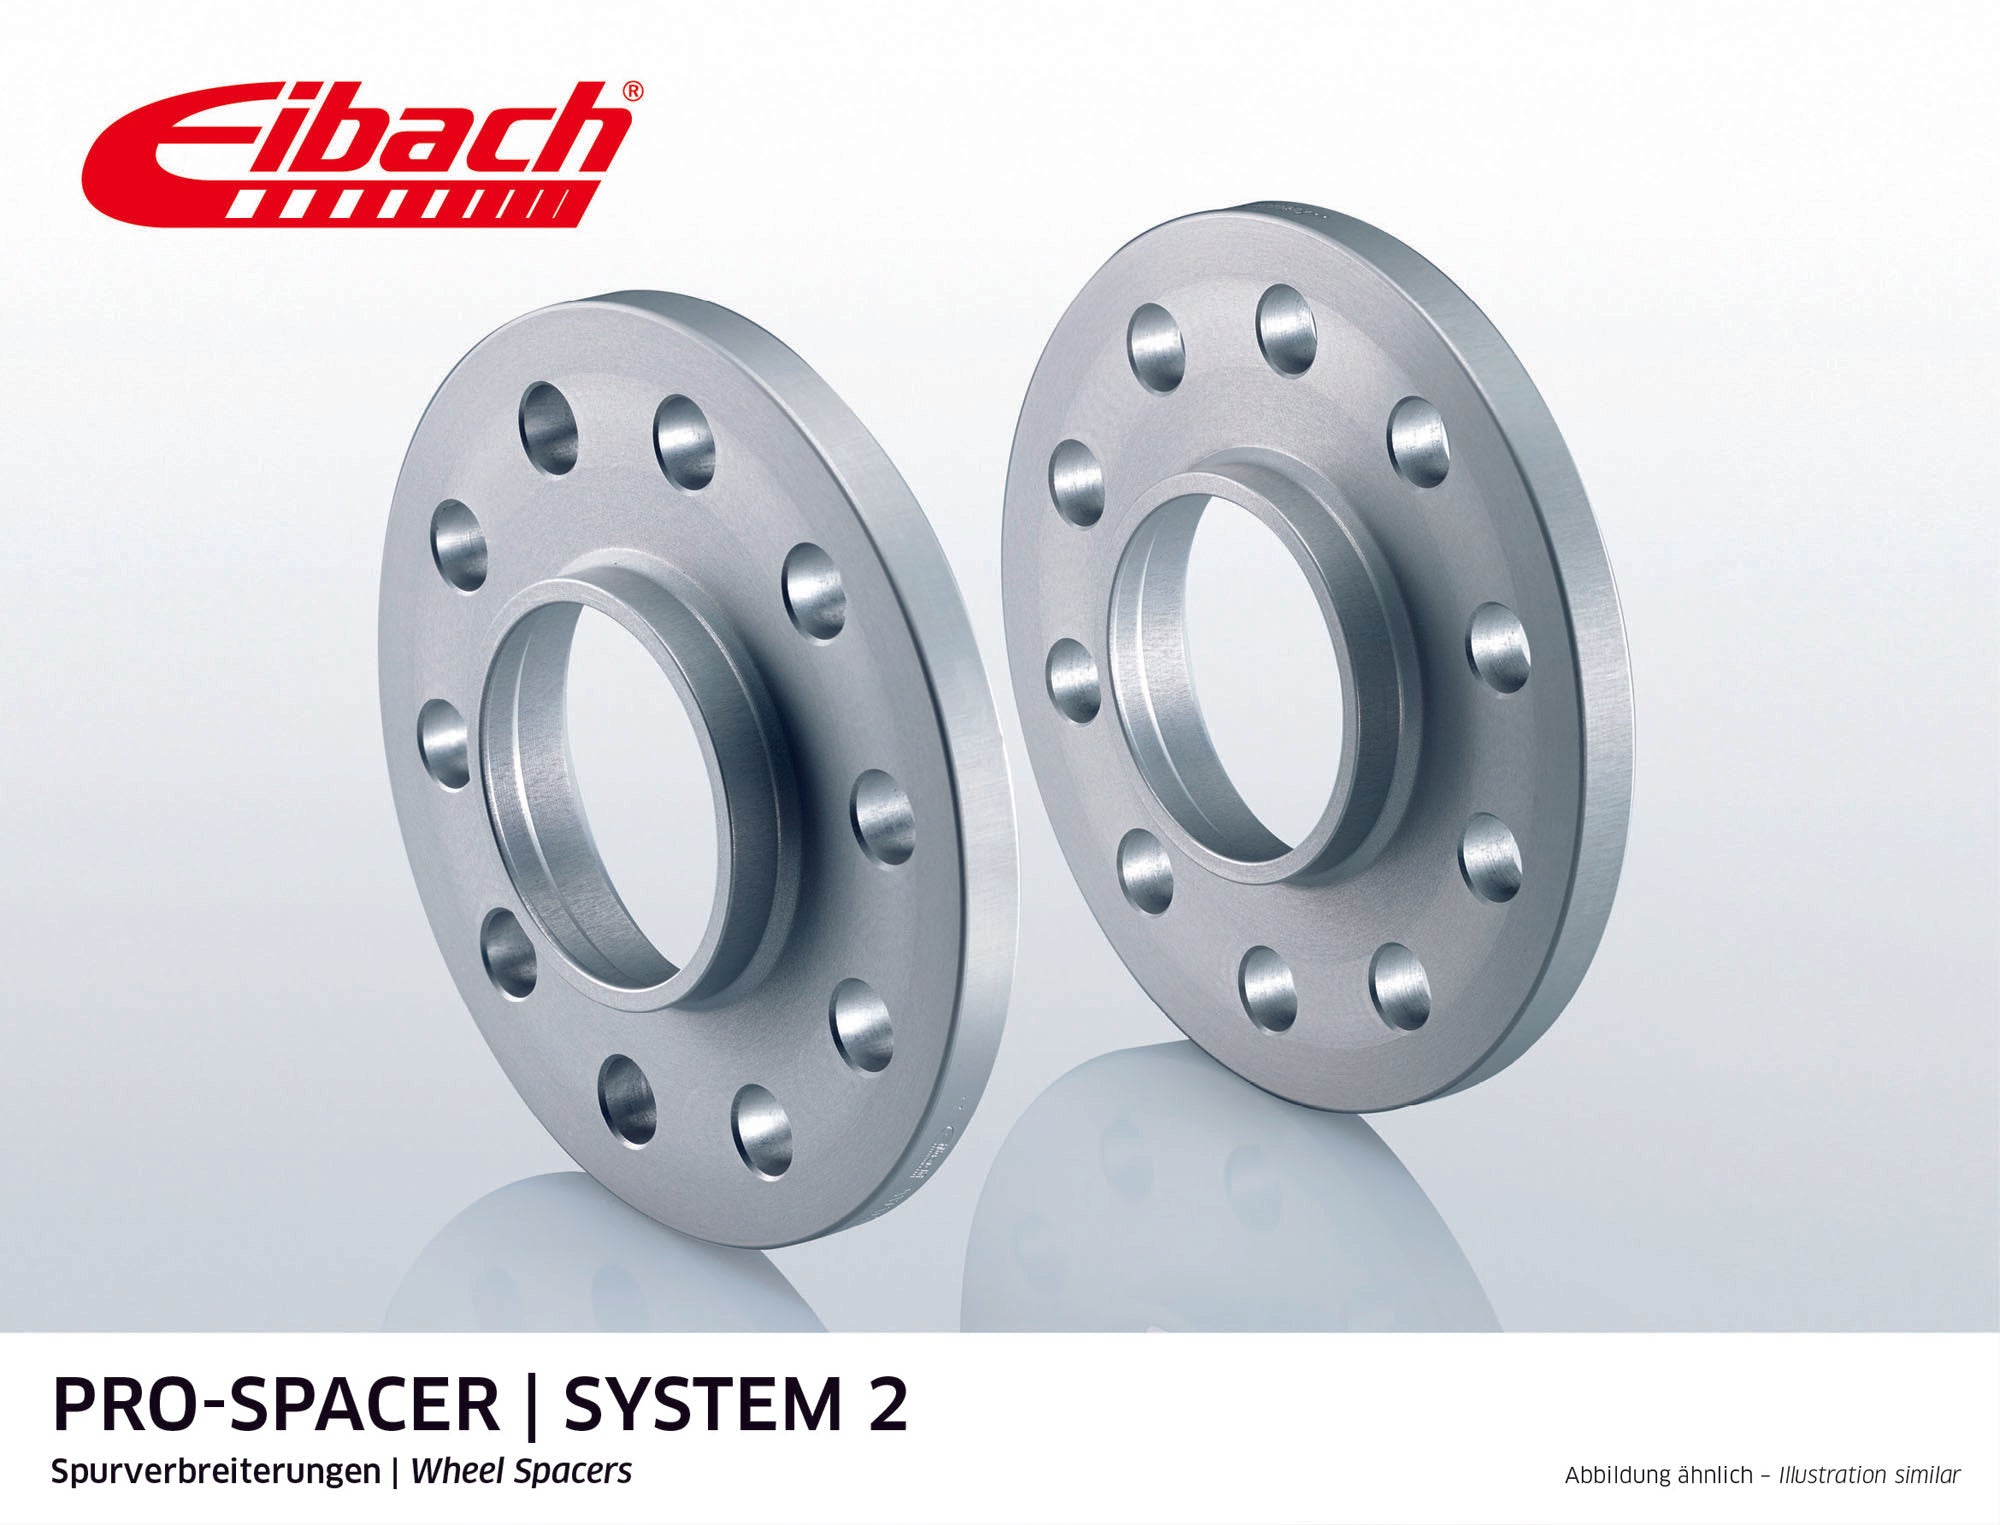 Eibach 23mm Pro-Spacer - Silver Anodized Wheel Spacer CAYENNE 2002-10 #S90-2-23-001